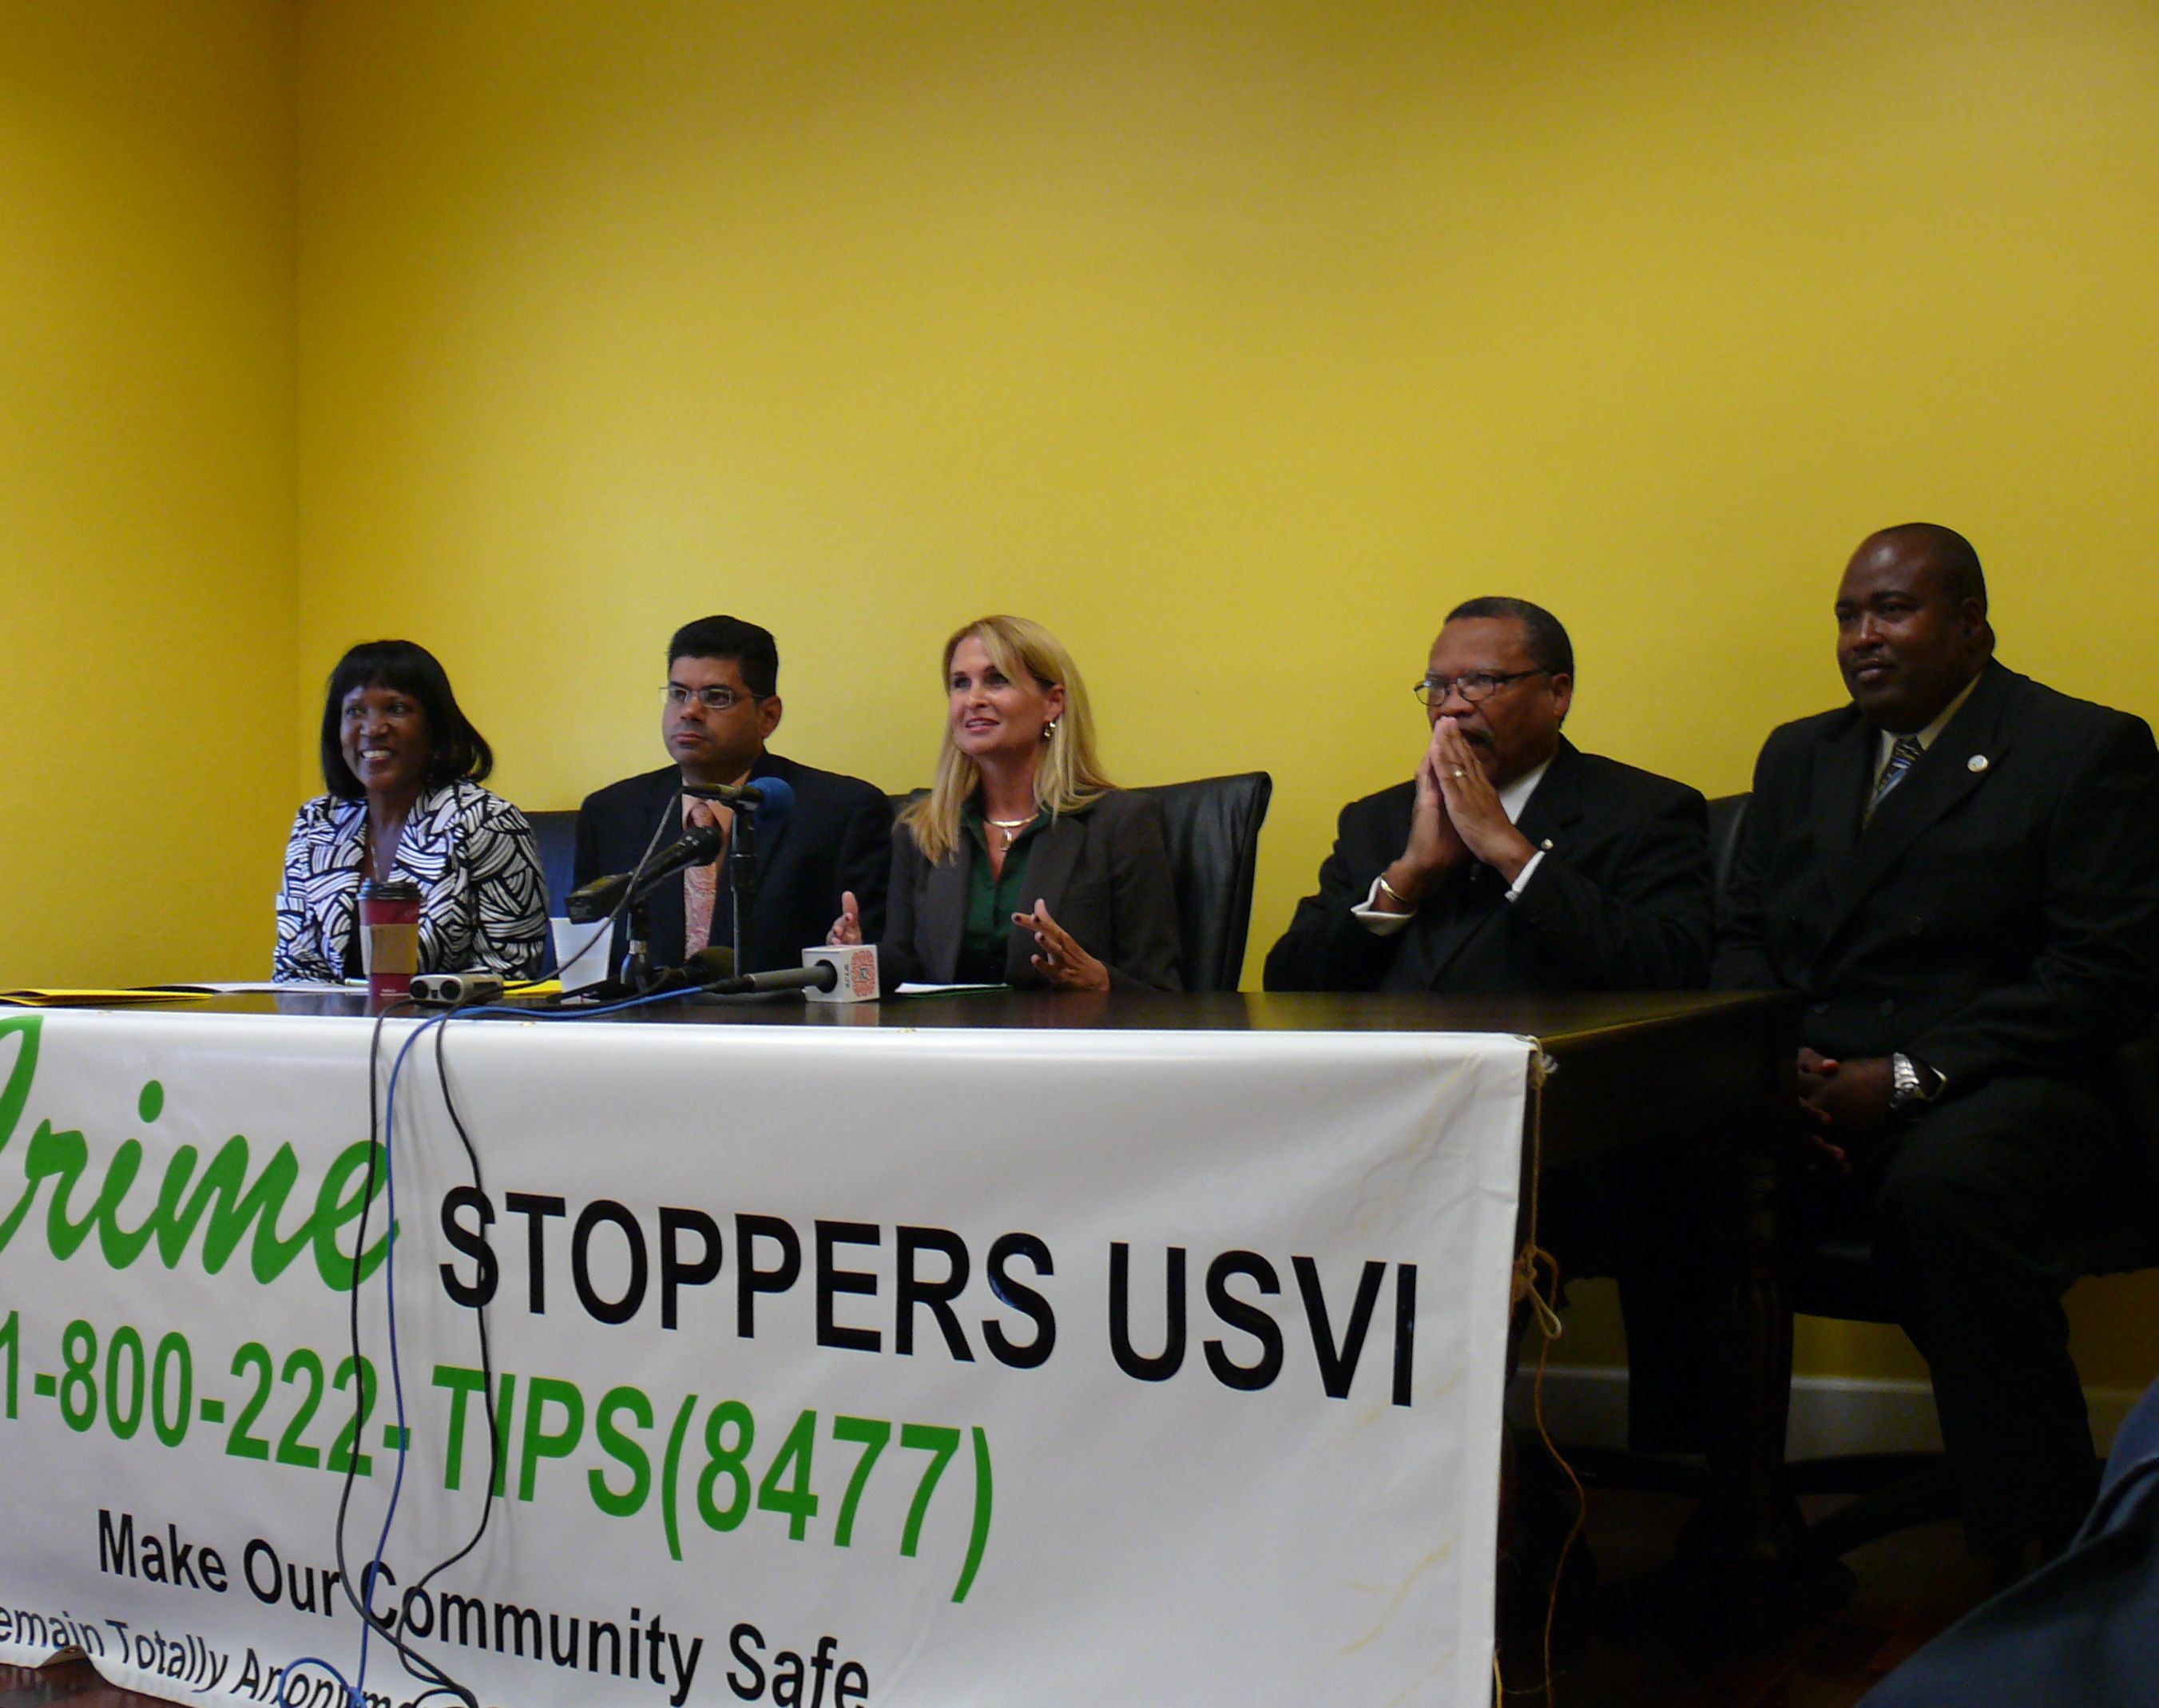 Crime Stoppers USVI's Judith Fricks (center) pointed to a long list of achievements during Tuesday's press conference.